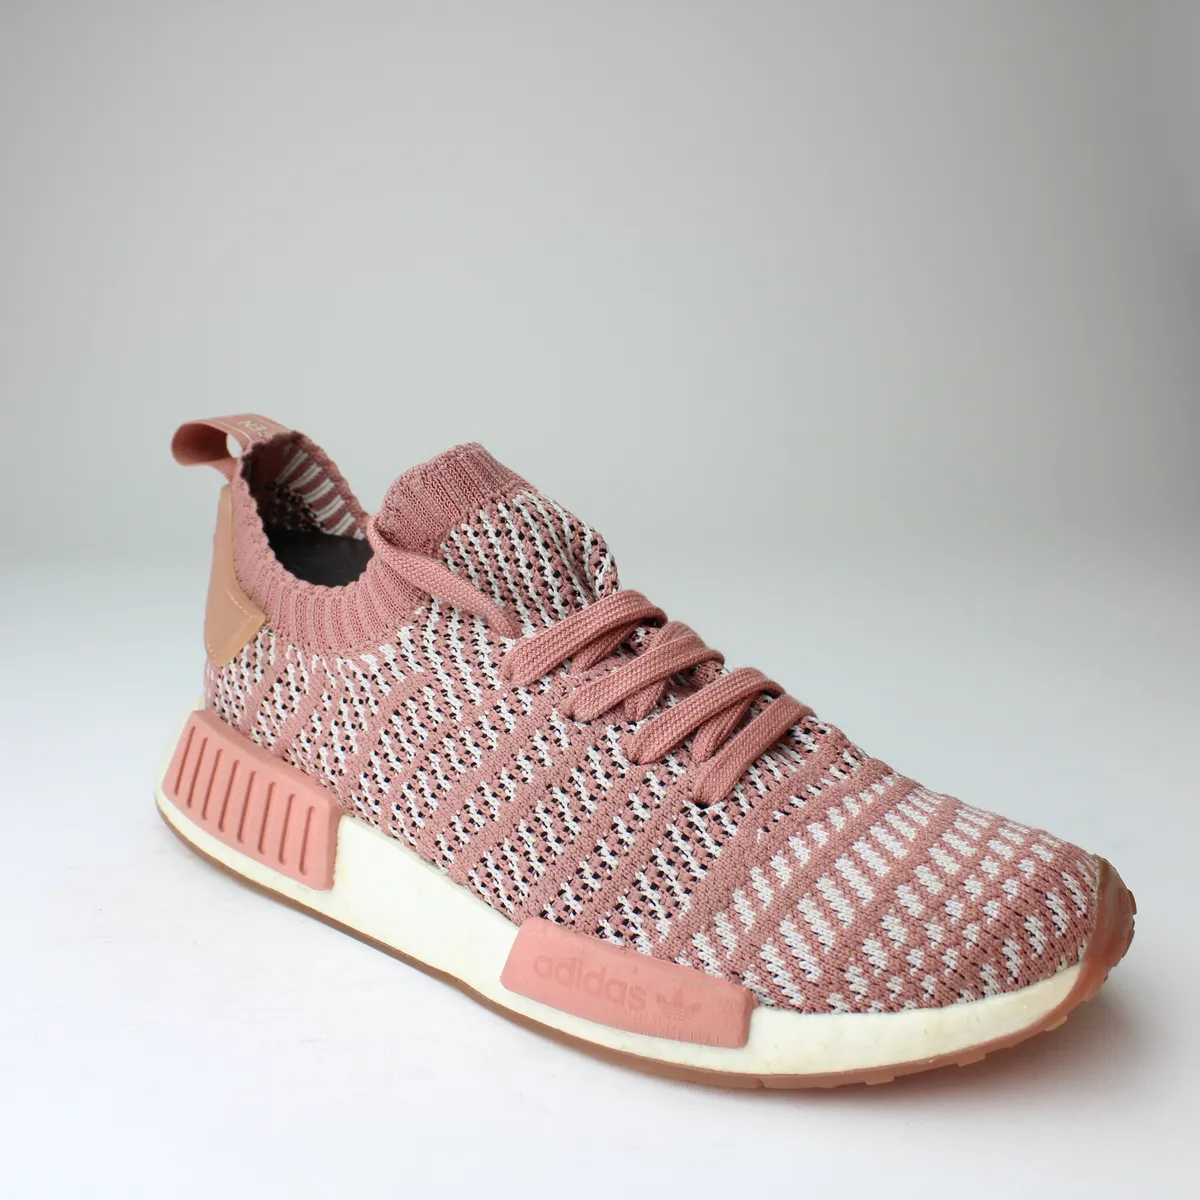 tilgive søsyge lugt adidas Nmd_R1 Stlt Pk Womens Size 8 M Sneakers Casual Shoes CQ2028 | eBay